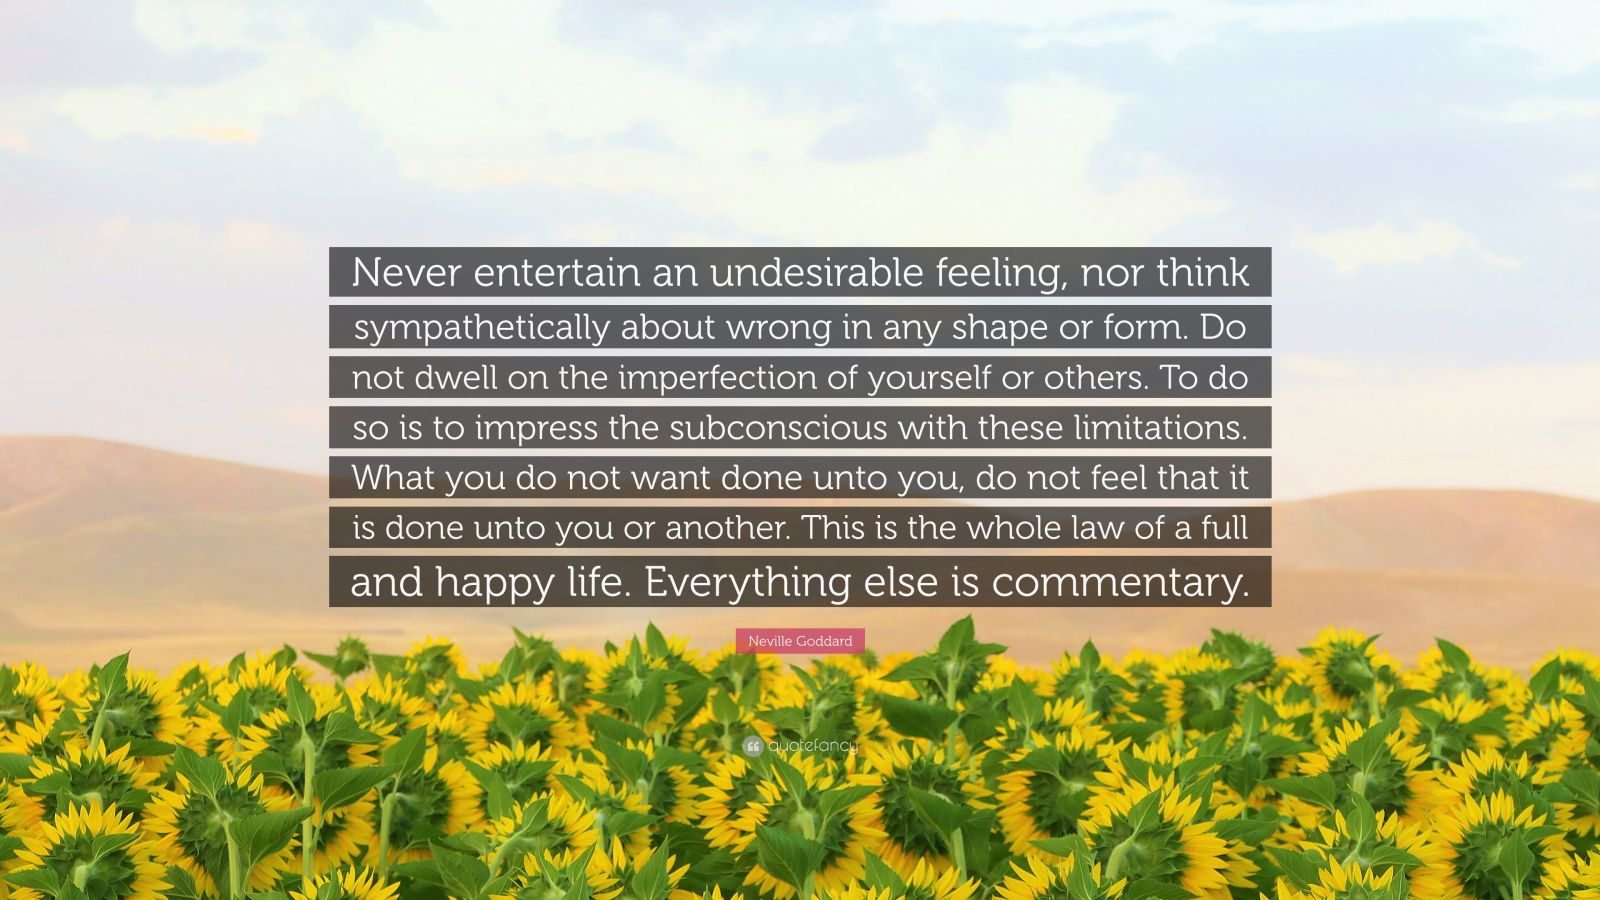 Neville Goddard Quote: “Never entertain an undesirable feeling, nor ...